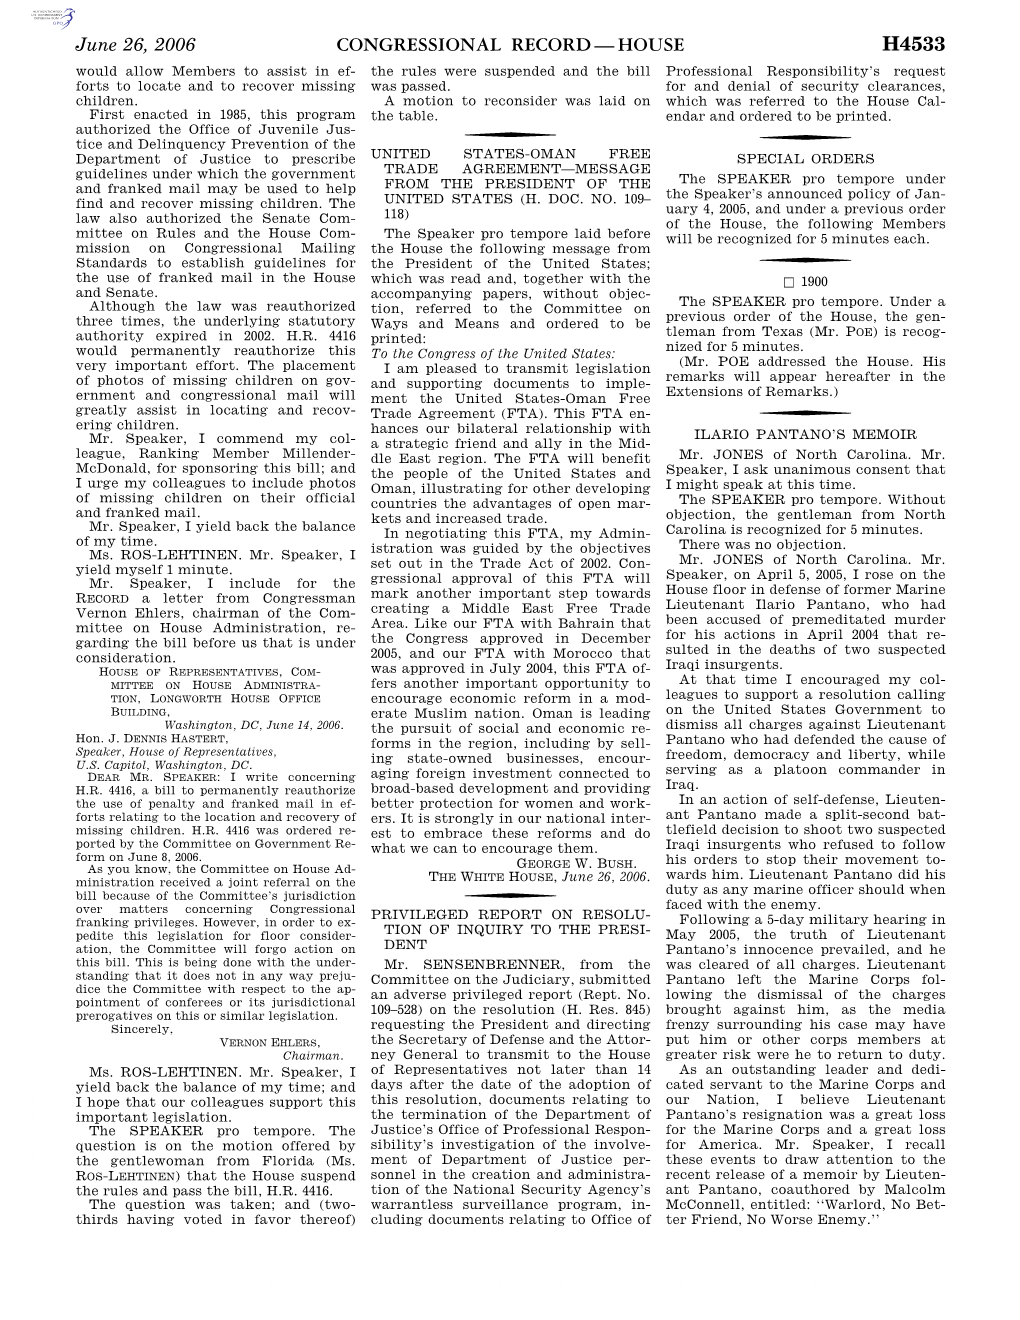 Congressional Record—House H4533